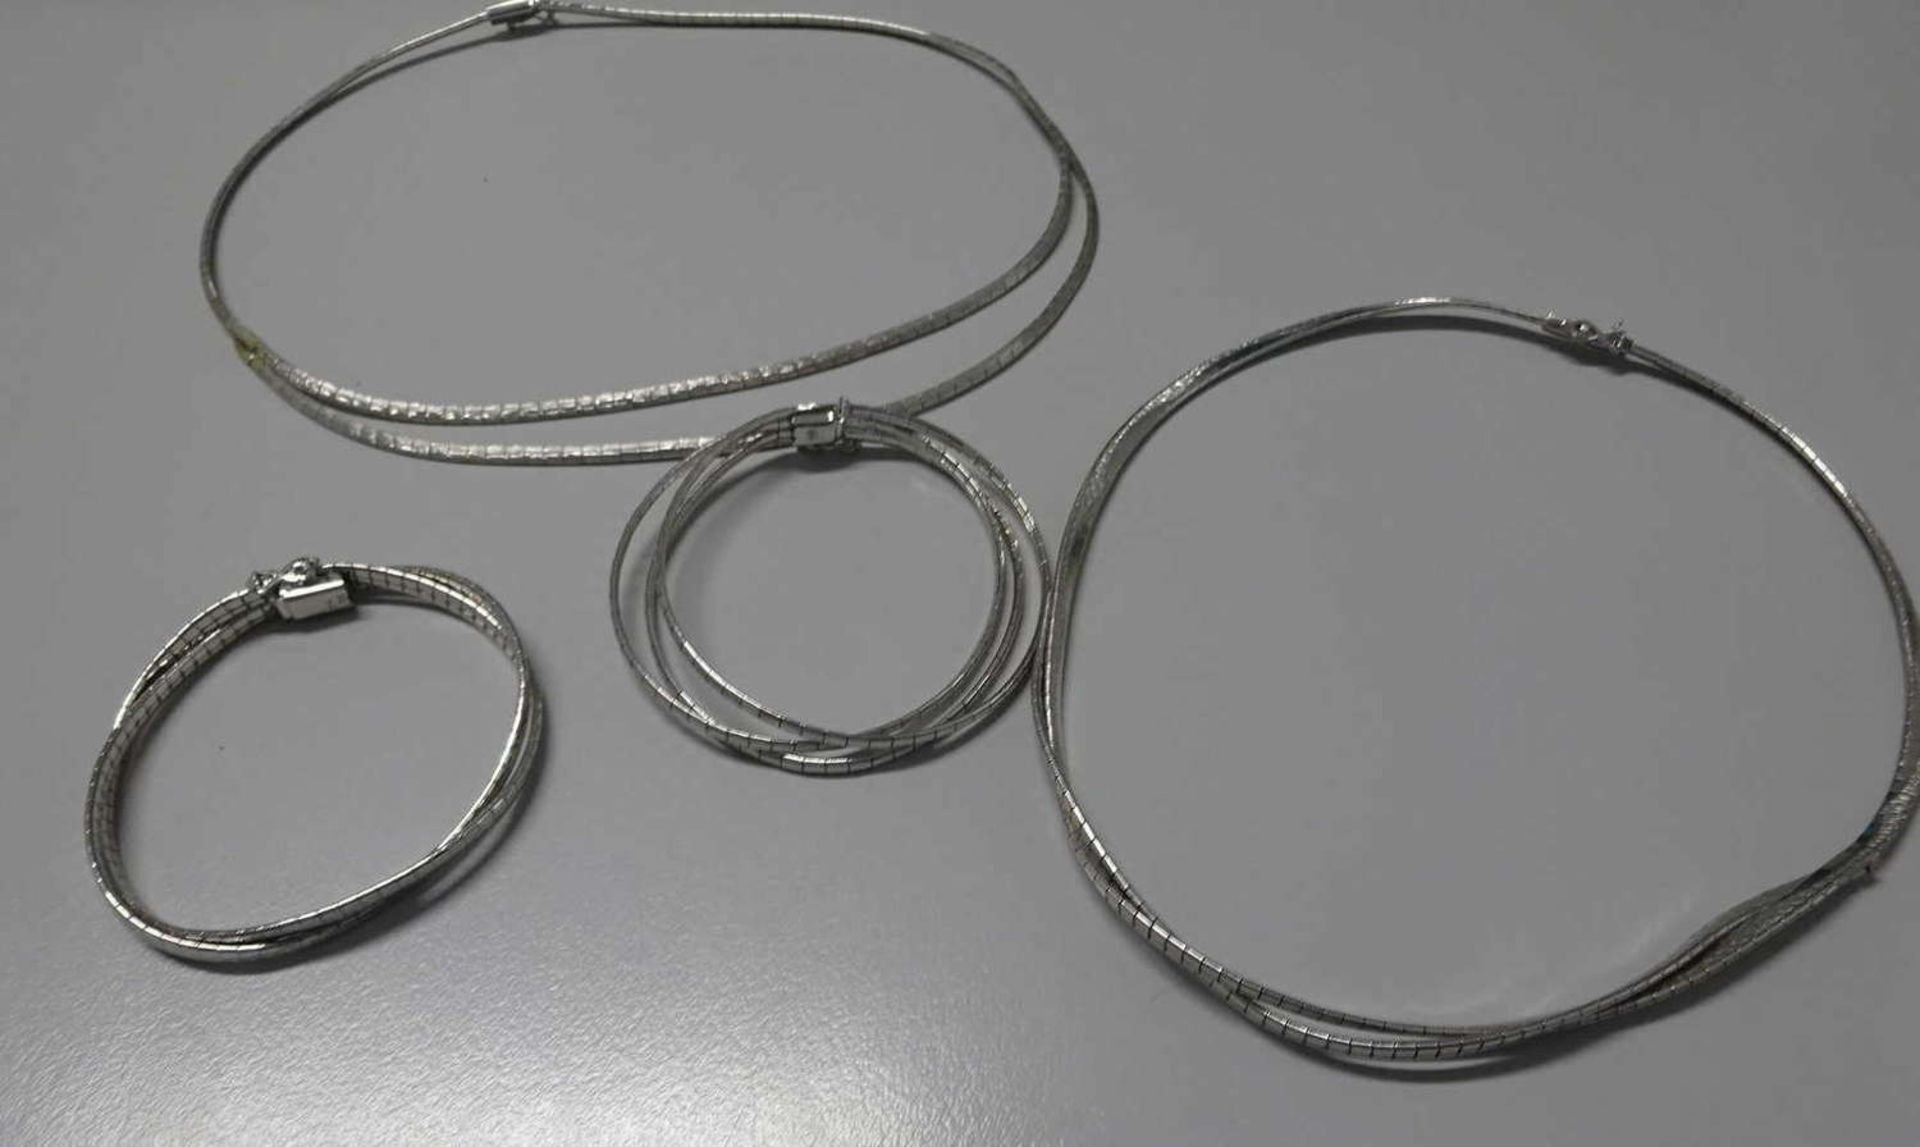 2 Colliers, sowie 2 Armbänder, alle Silber. Gewicht ca. 77,1 g. 2 necklaces and 2 bracelets, all